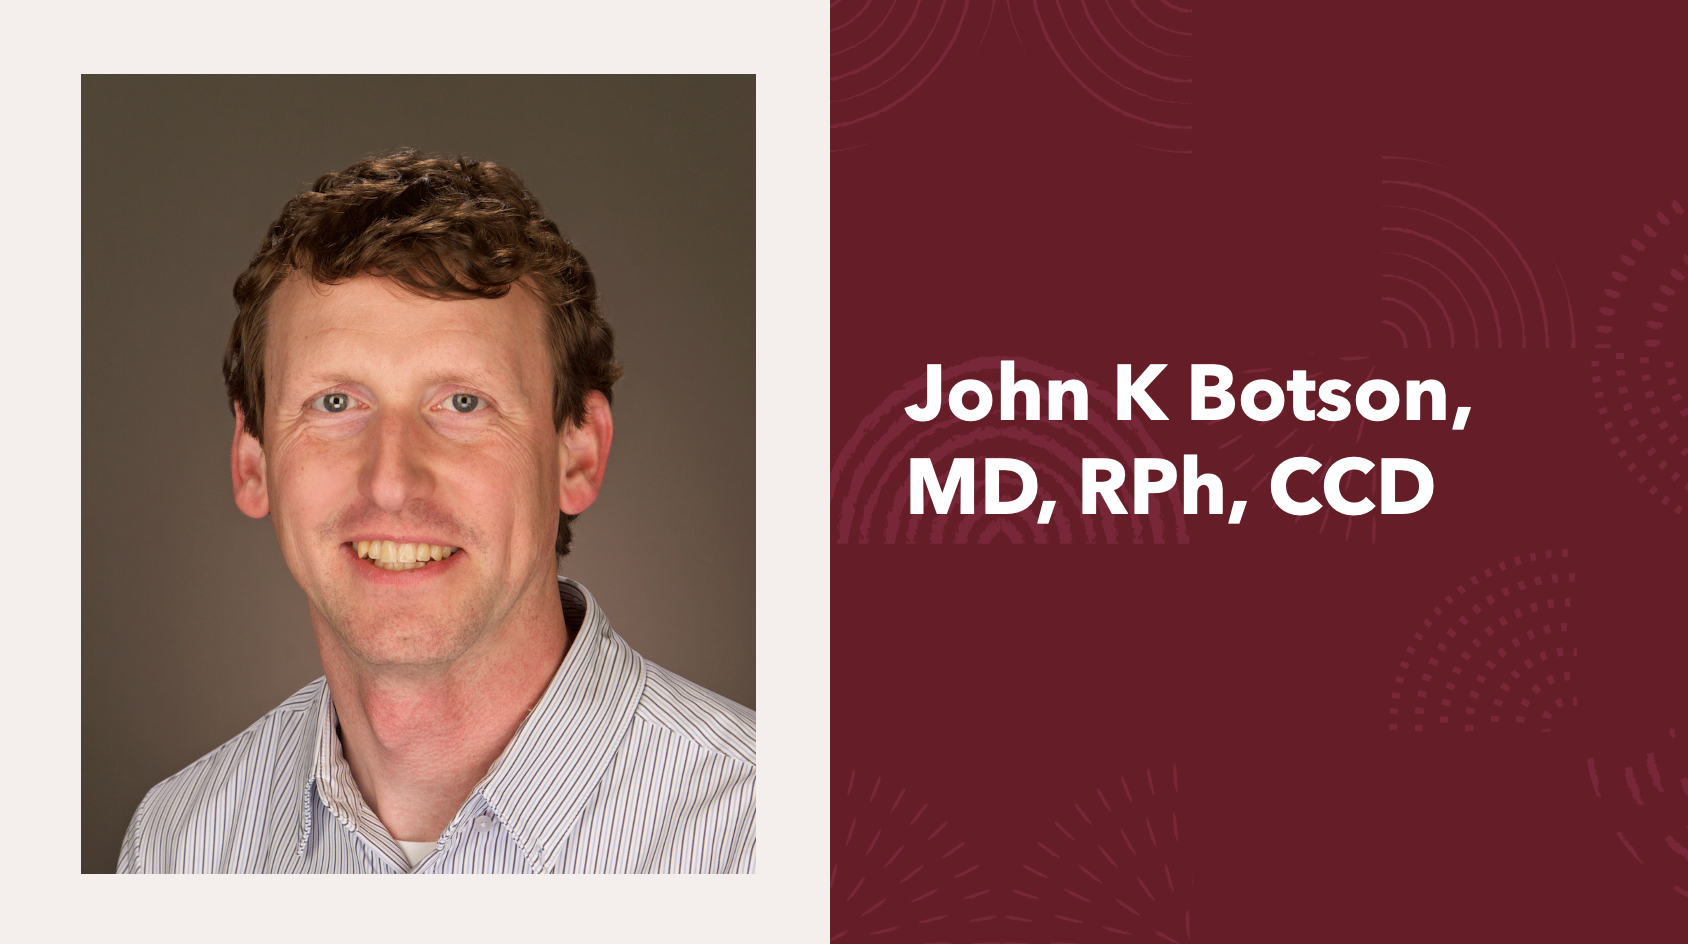 John K Botson MD, RPh, CCD: FDA Approval of Pegloticase Injection Plus Methotrexate for Gout Treatment